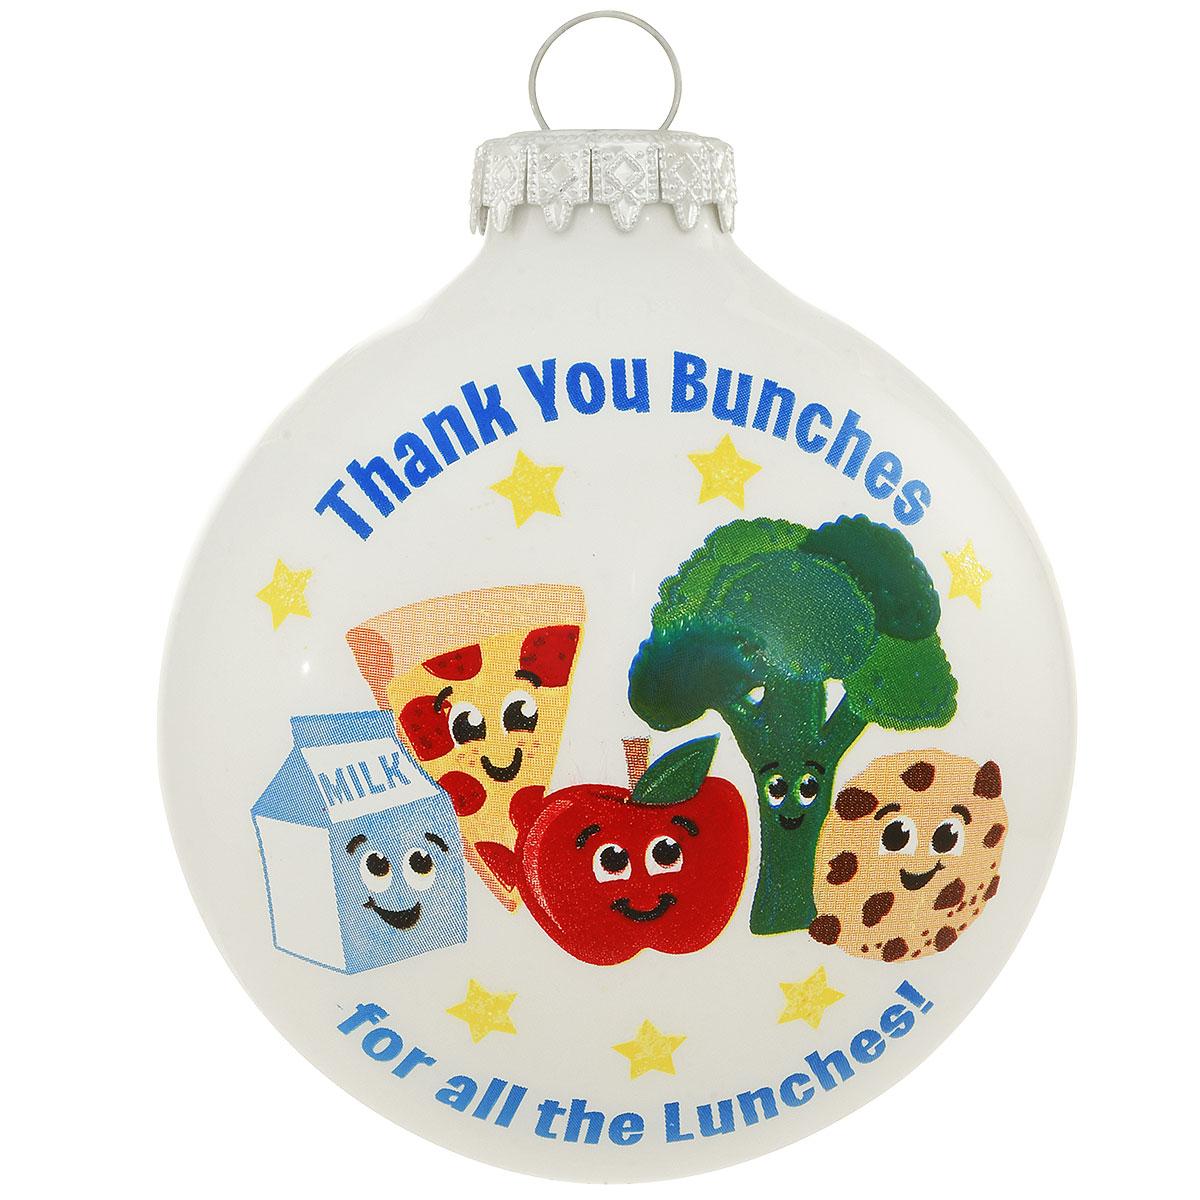 Thank You Bunches Glass Ornament